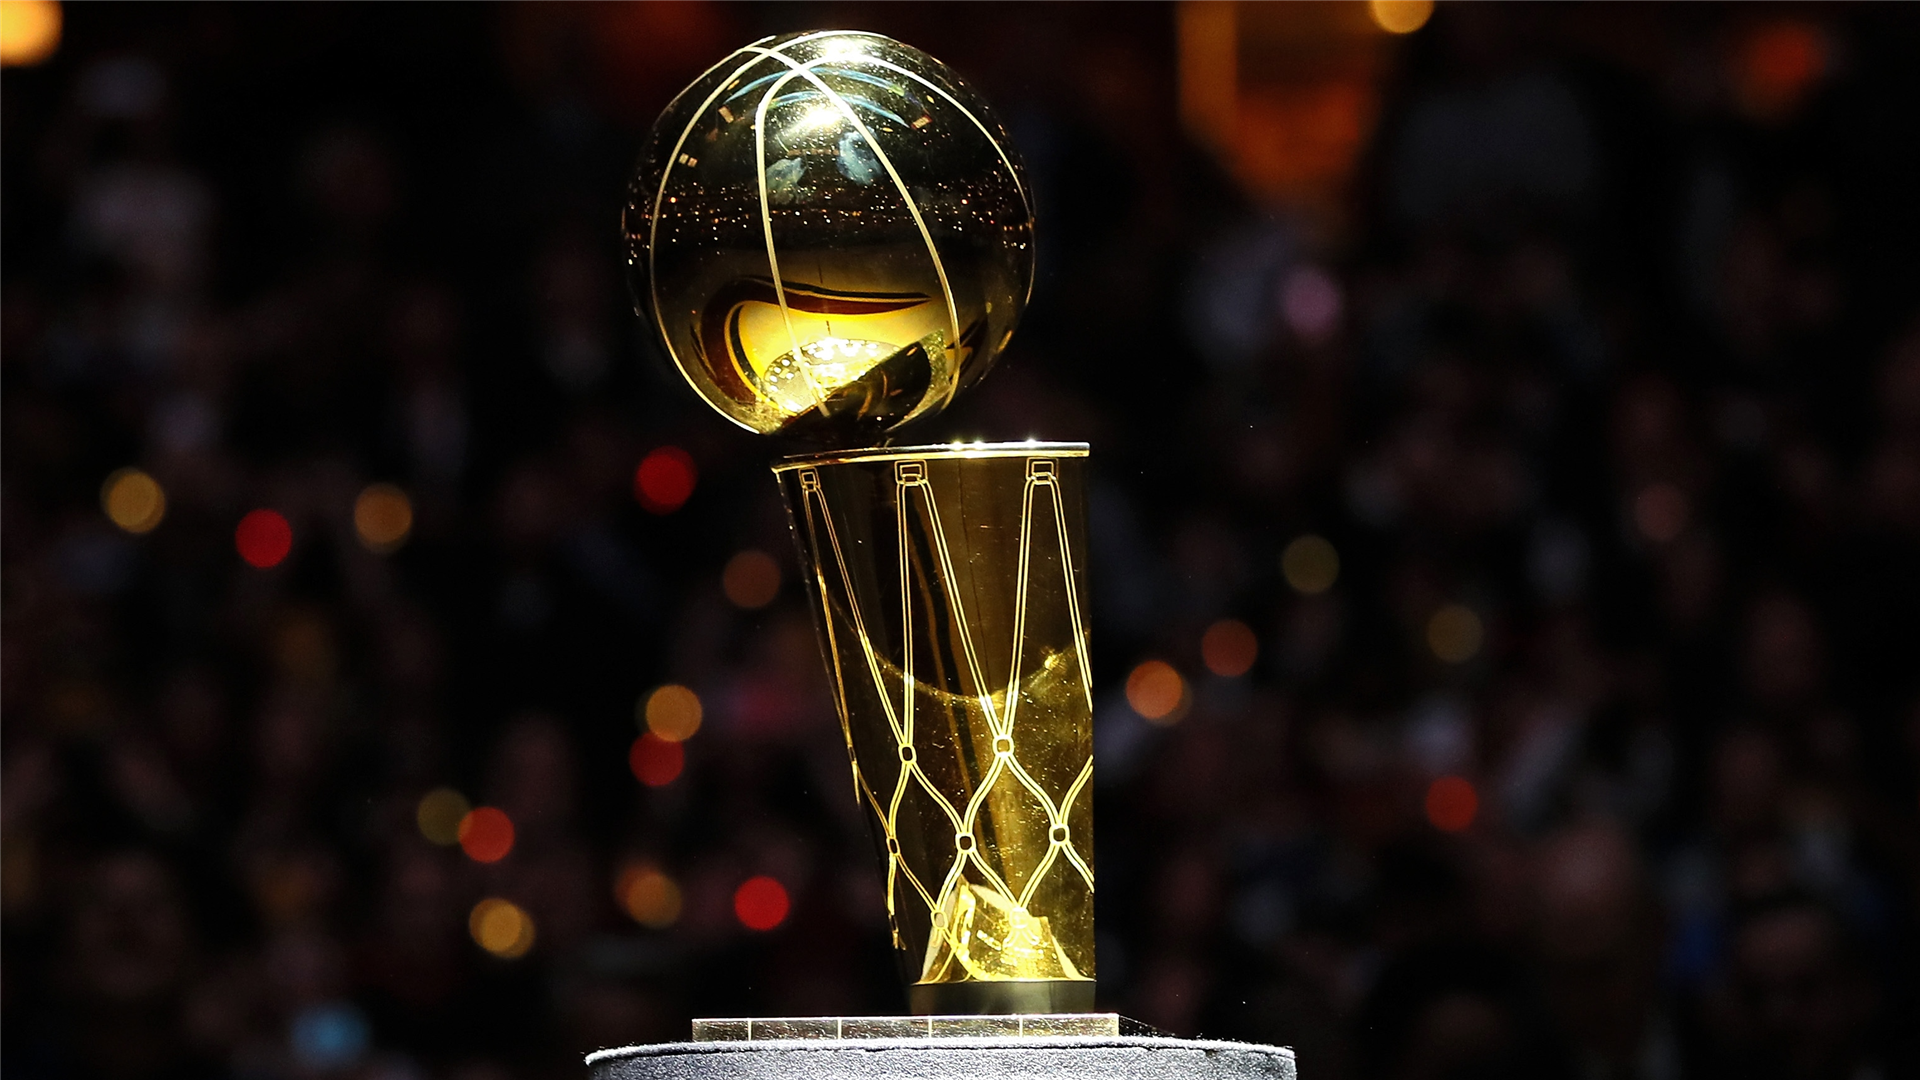 Anticipation Rises for 2020 NBA Championship - The Bottom Line UCSB